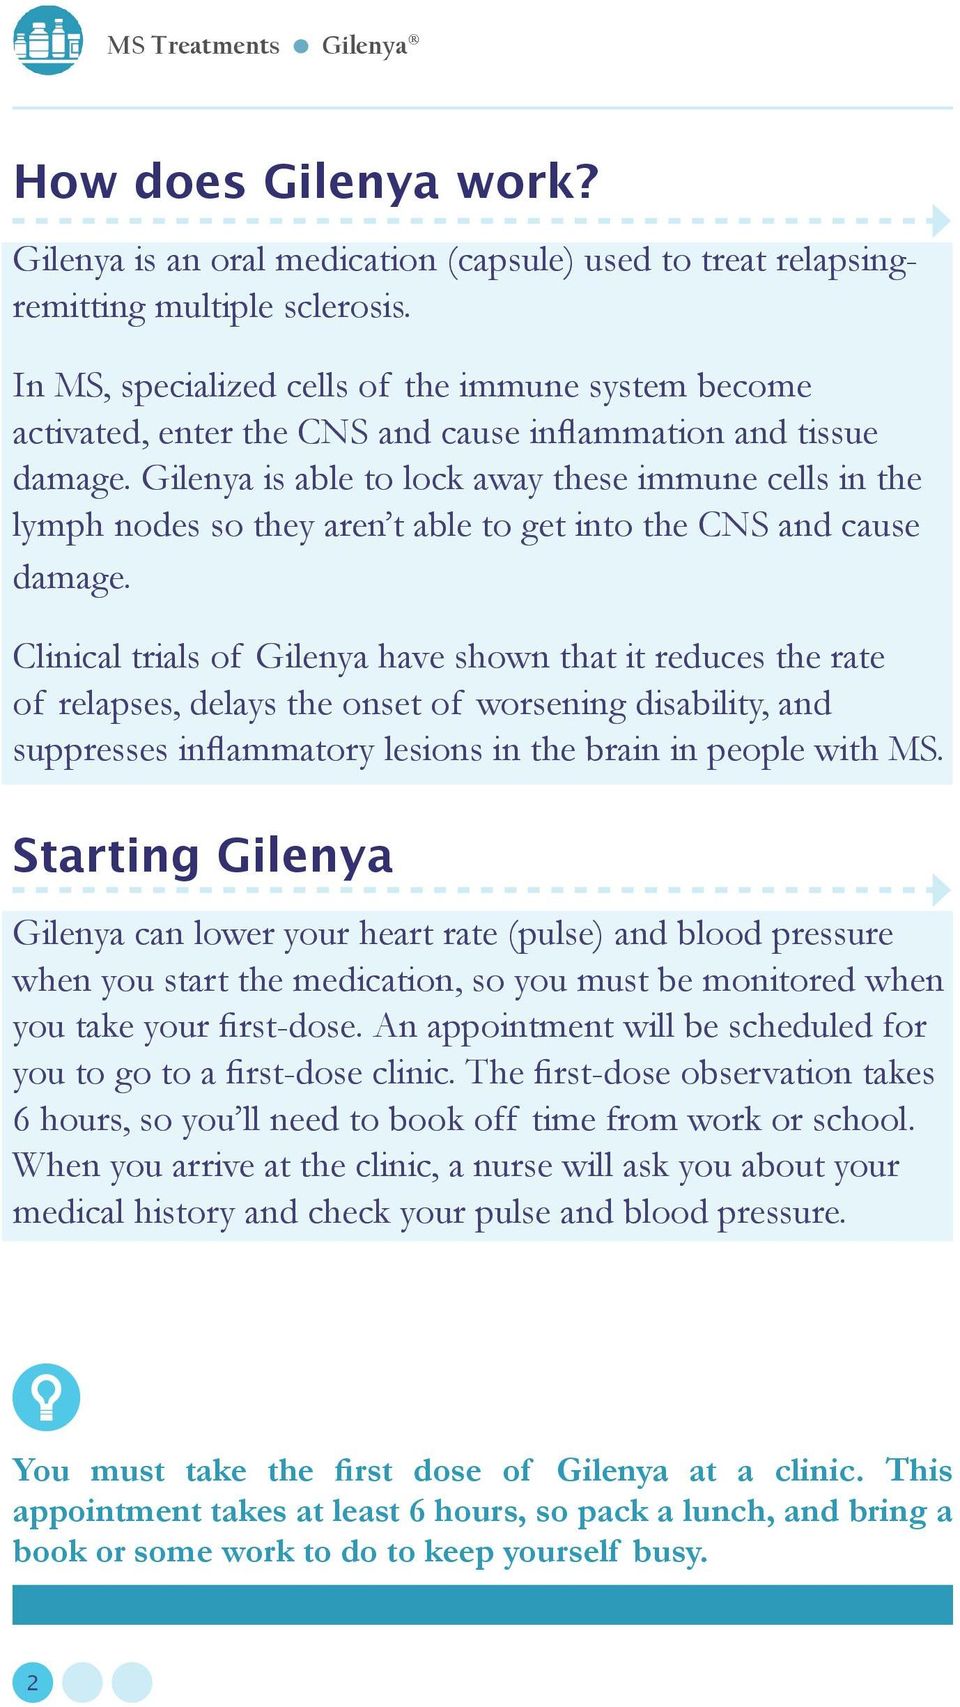 Gilenya is able to lock away these immune cells in the lymph nodes so they aren t able to get into the CNS and cause damage.